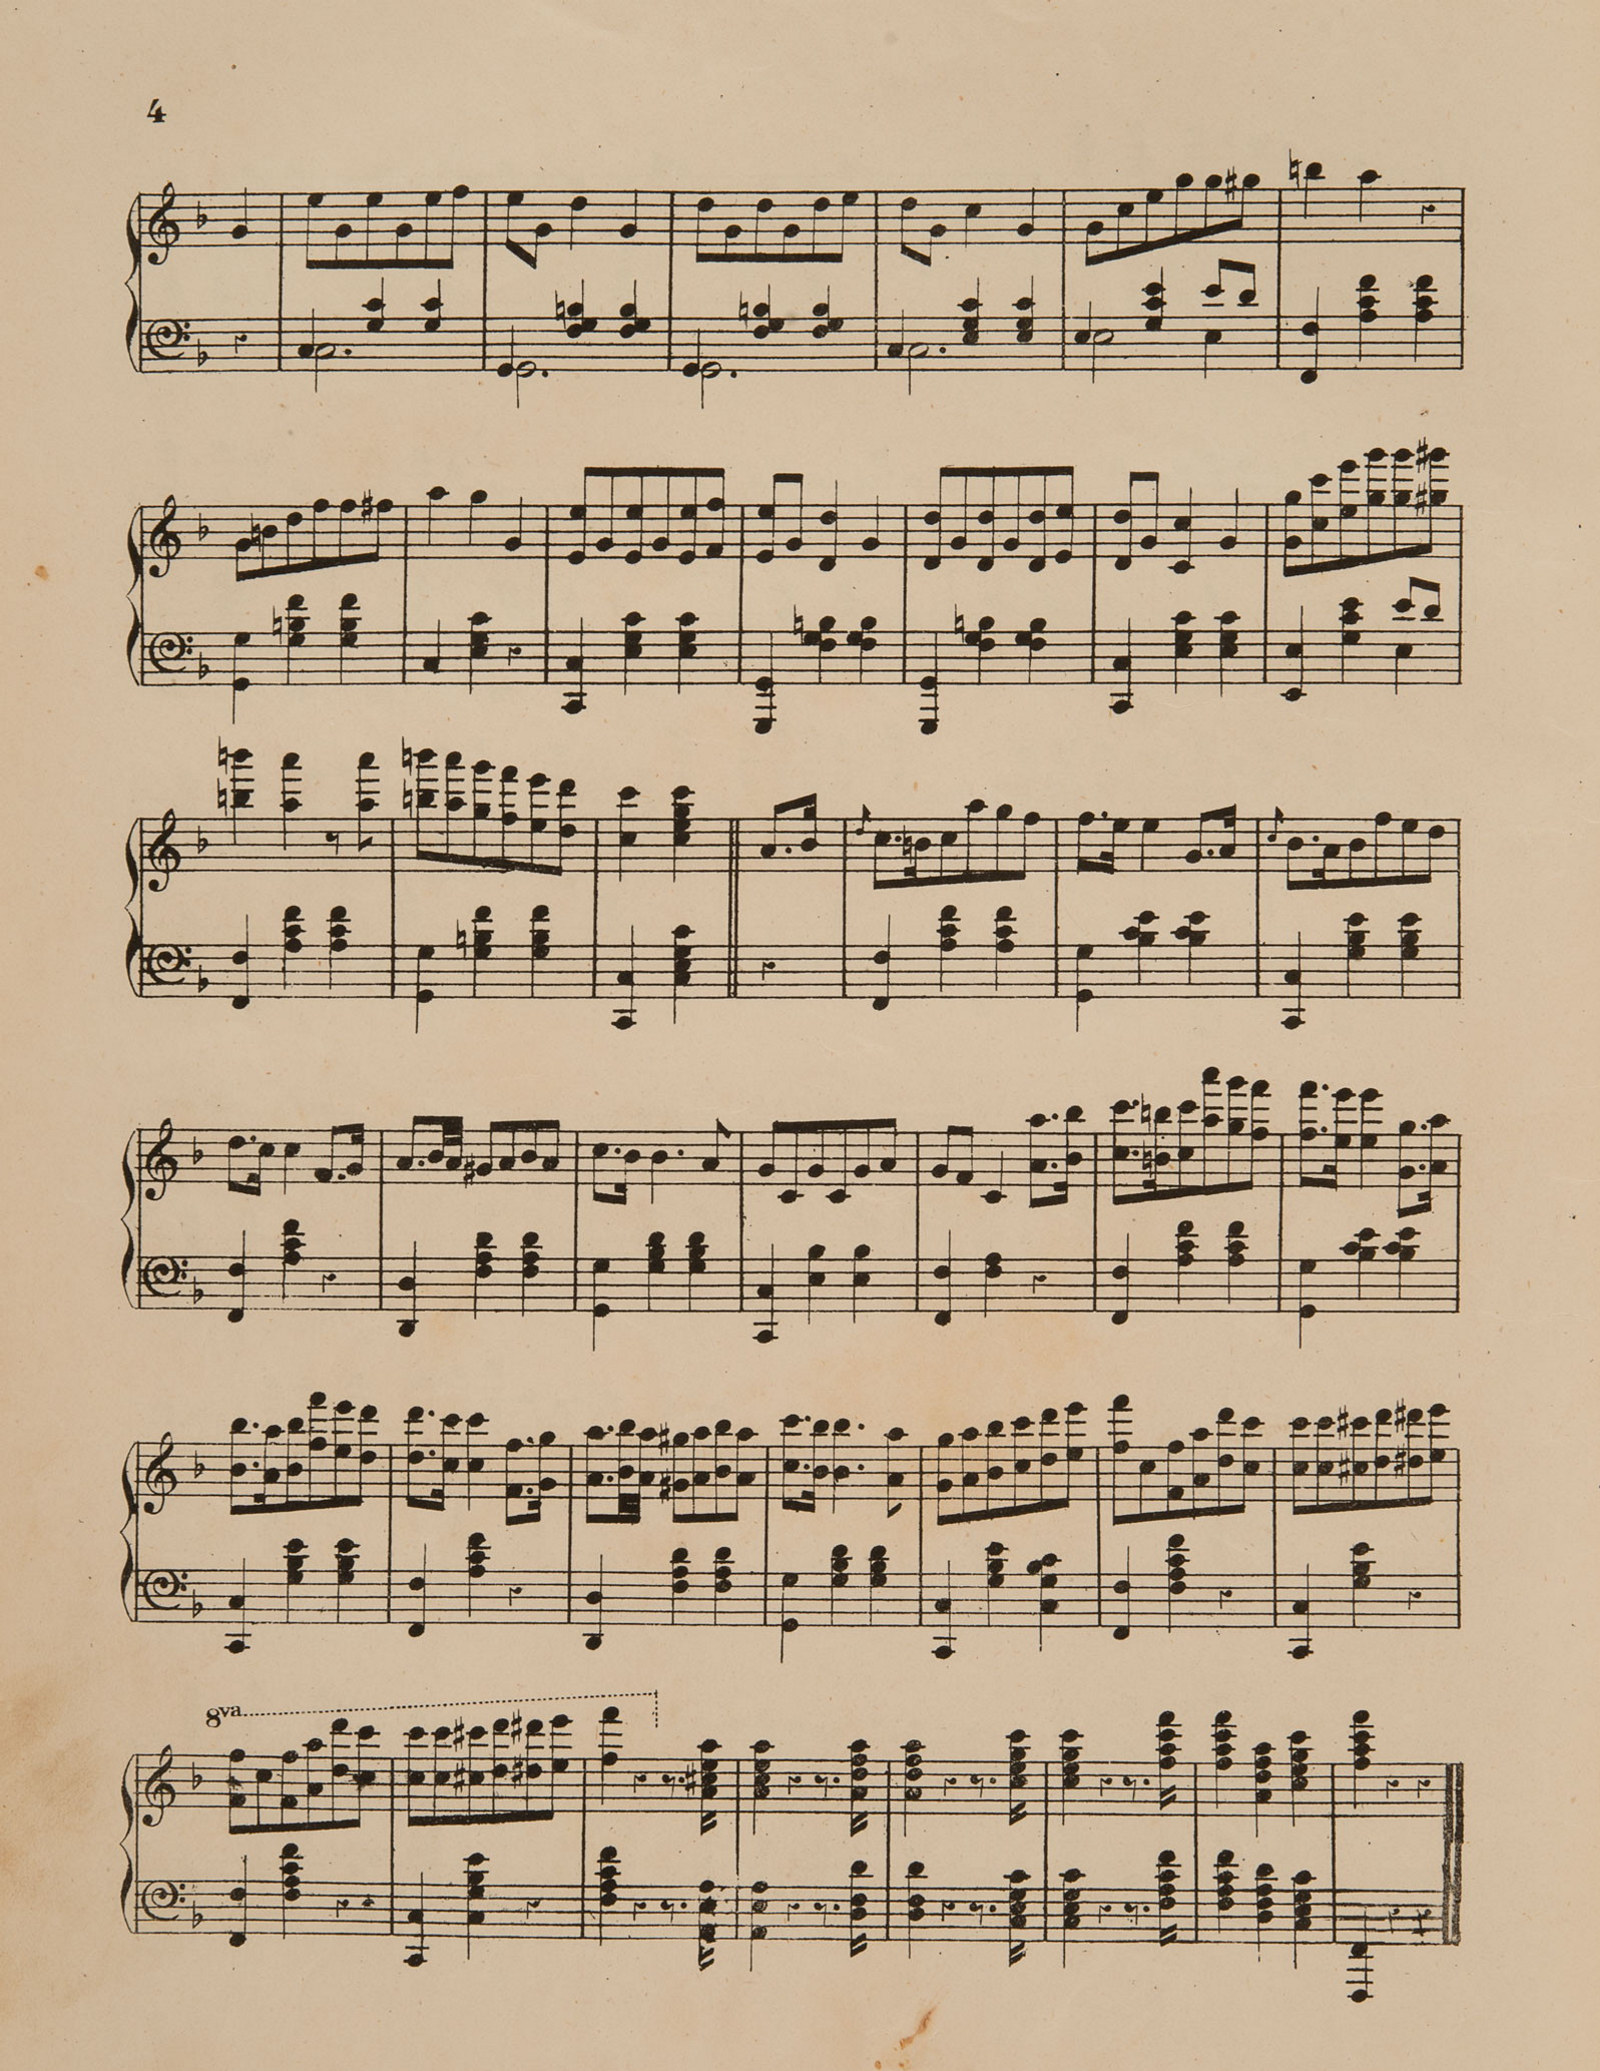 Sheet music, 'The Barham Mazurka', composed by Louise N, page 4, published 1876